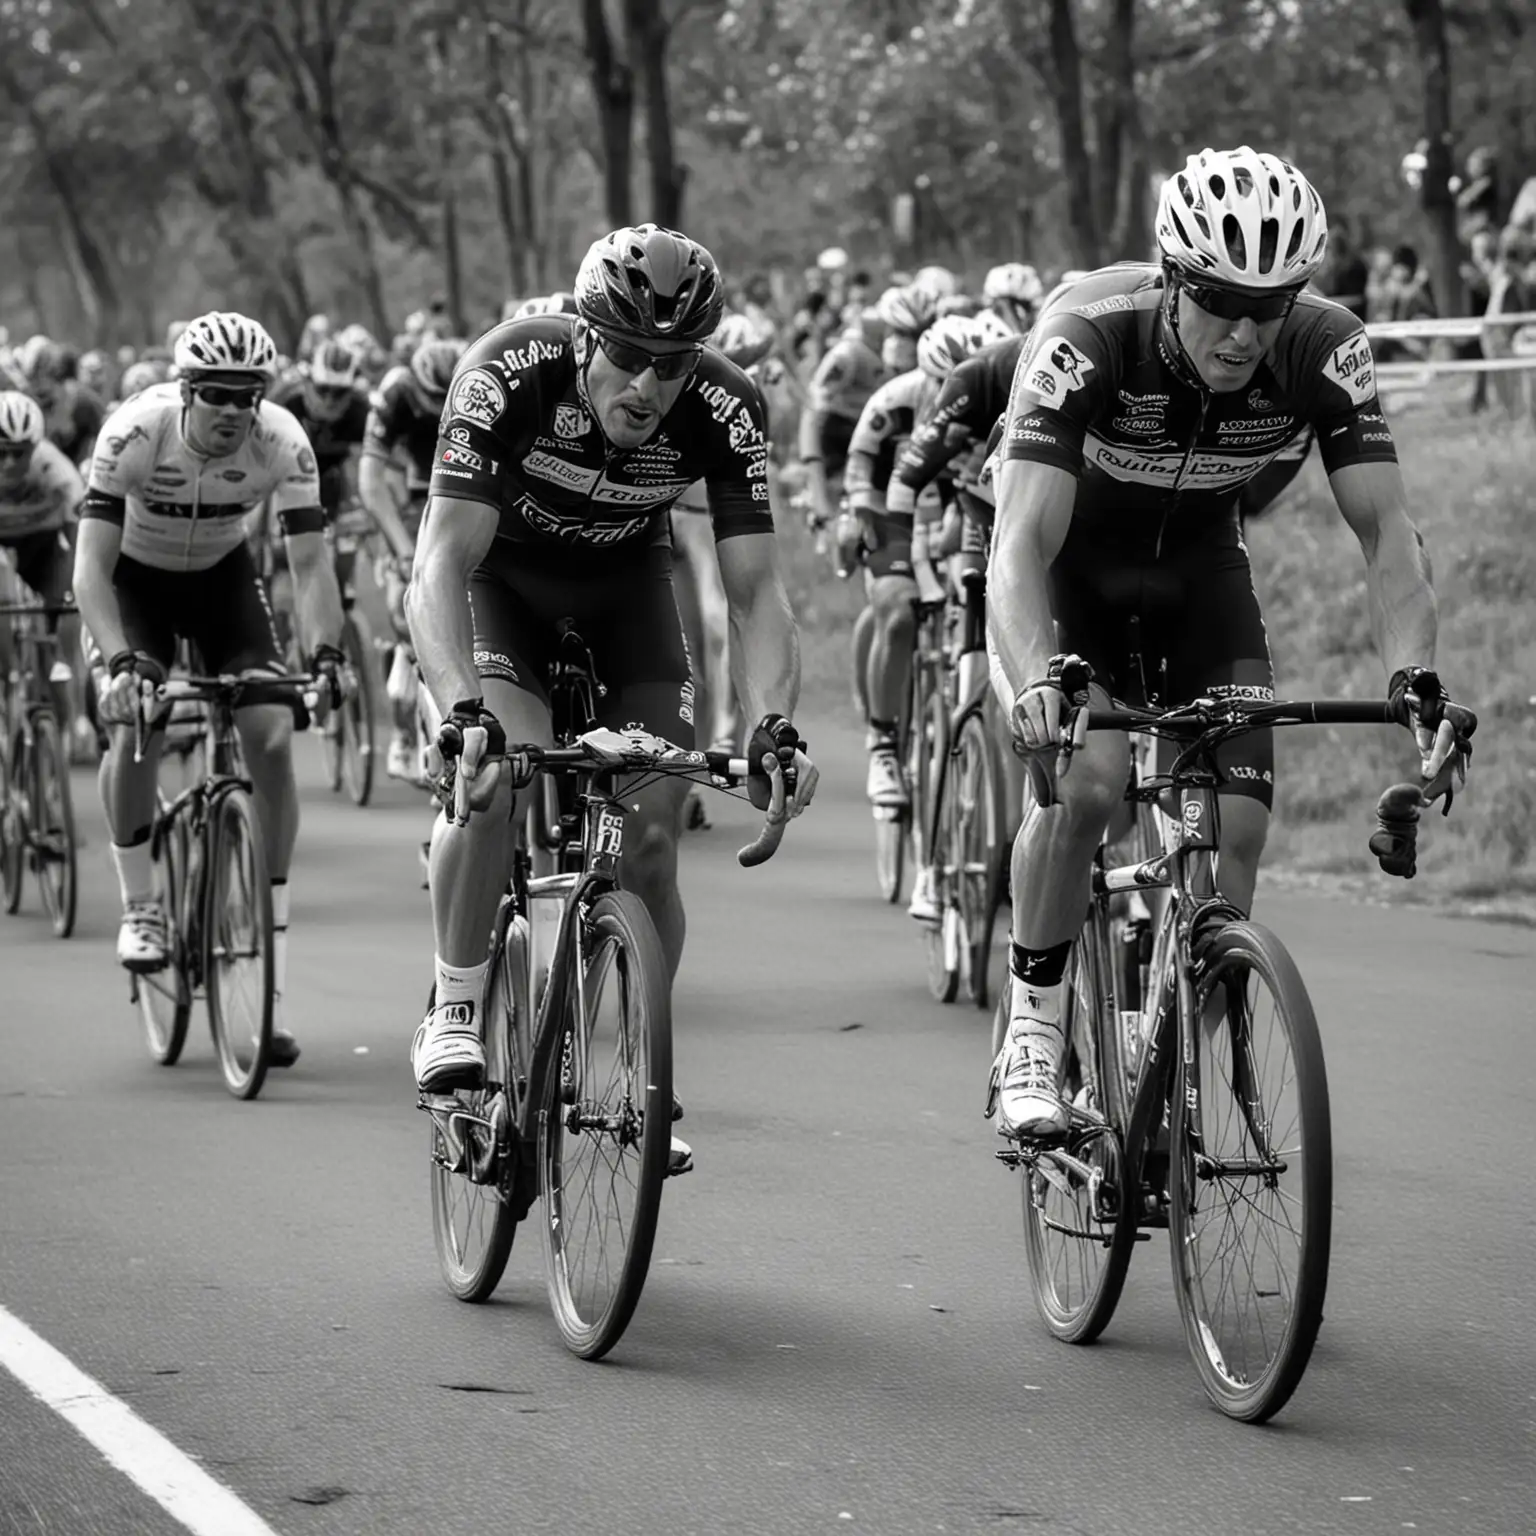 Intense Bicycle Race in Monochrome